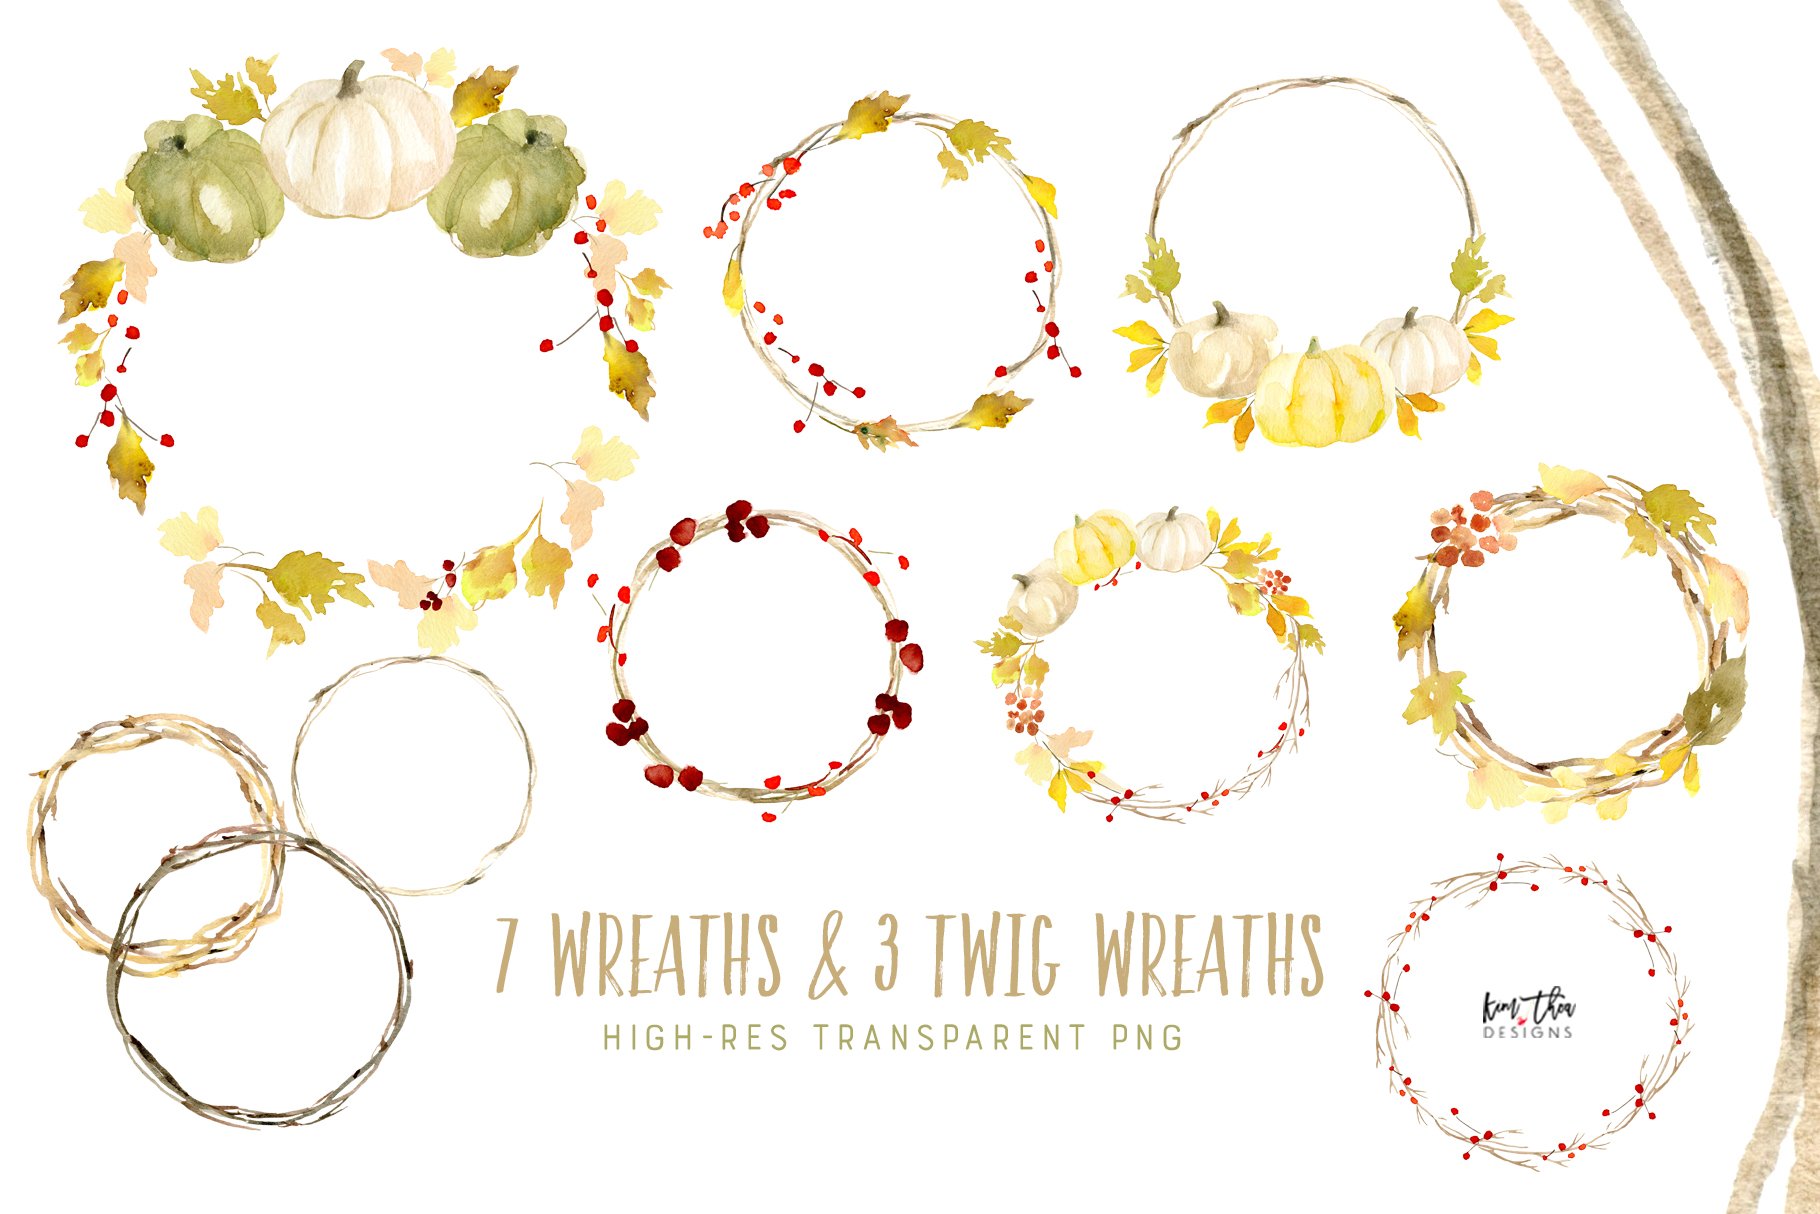 Fall wreathes in a delicate style.